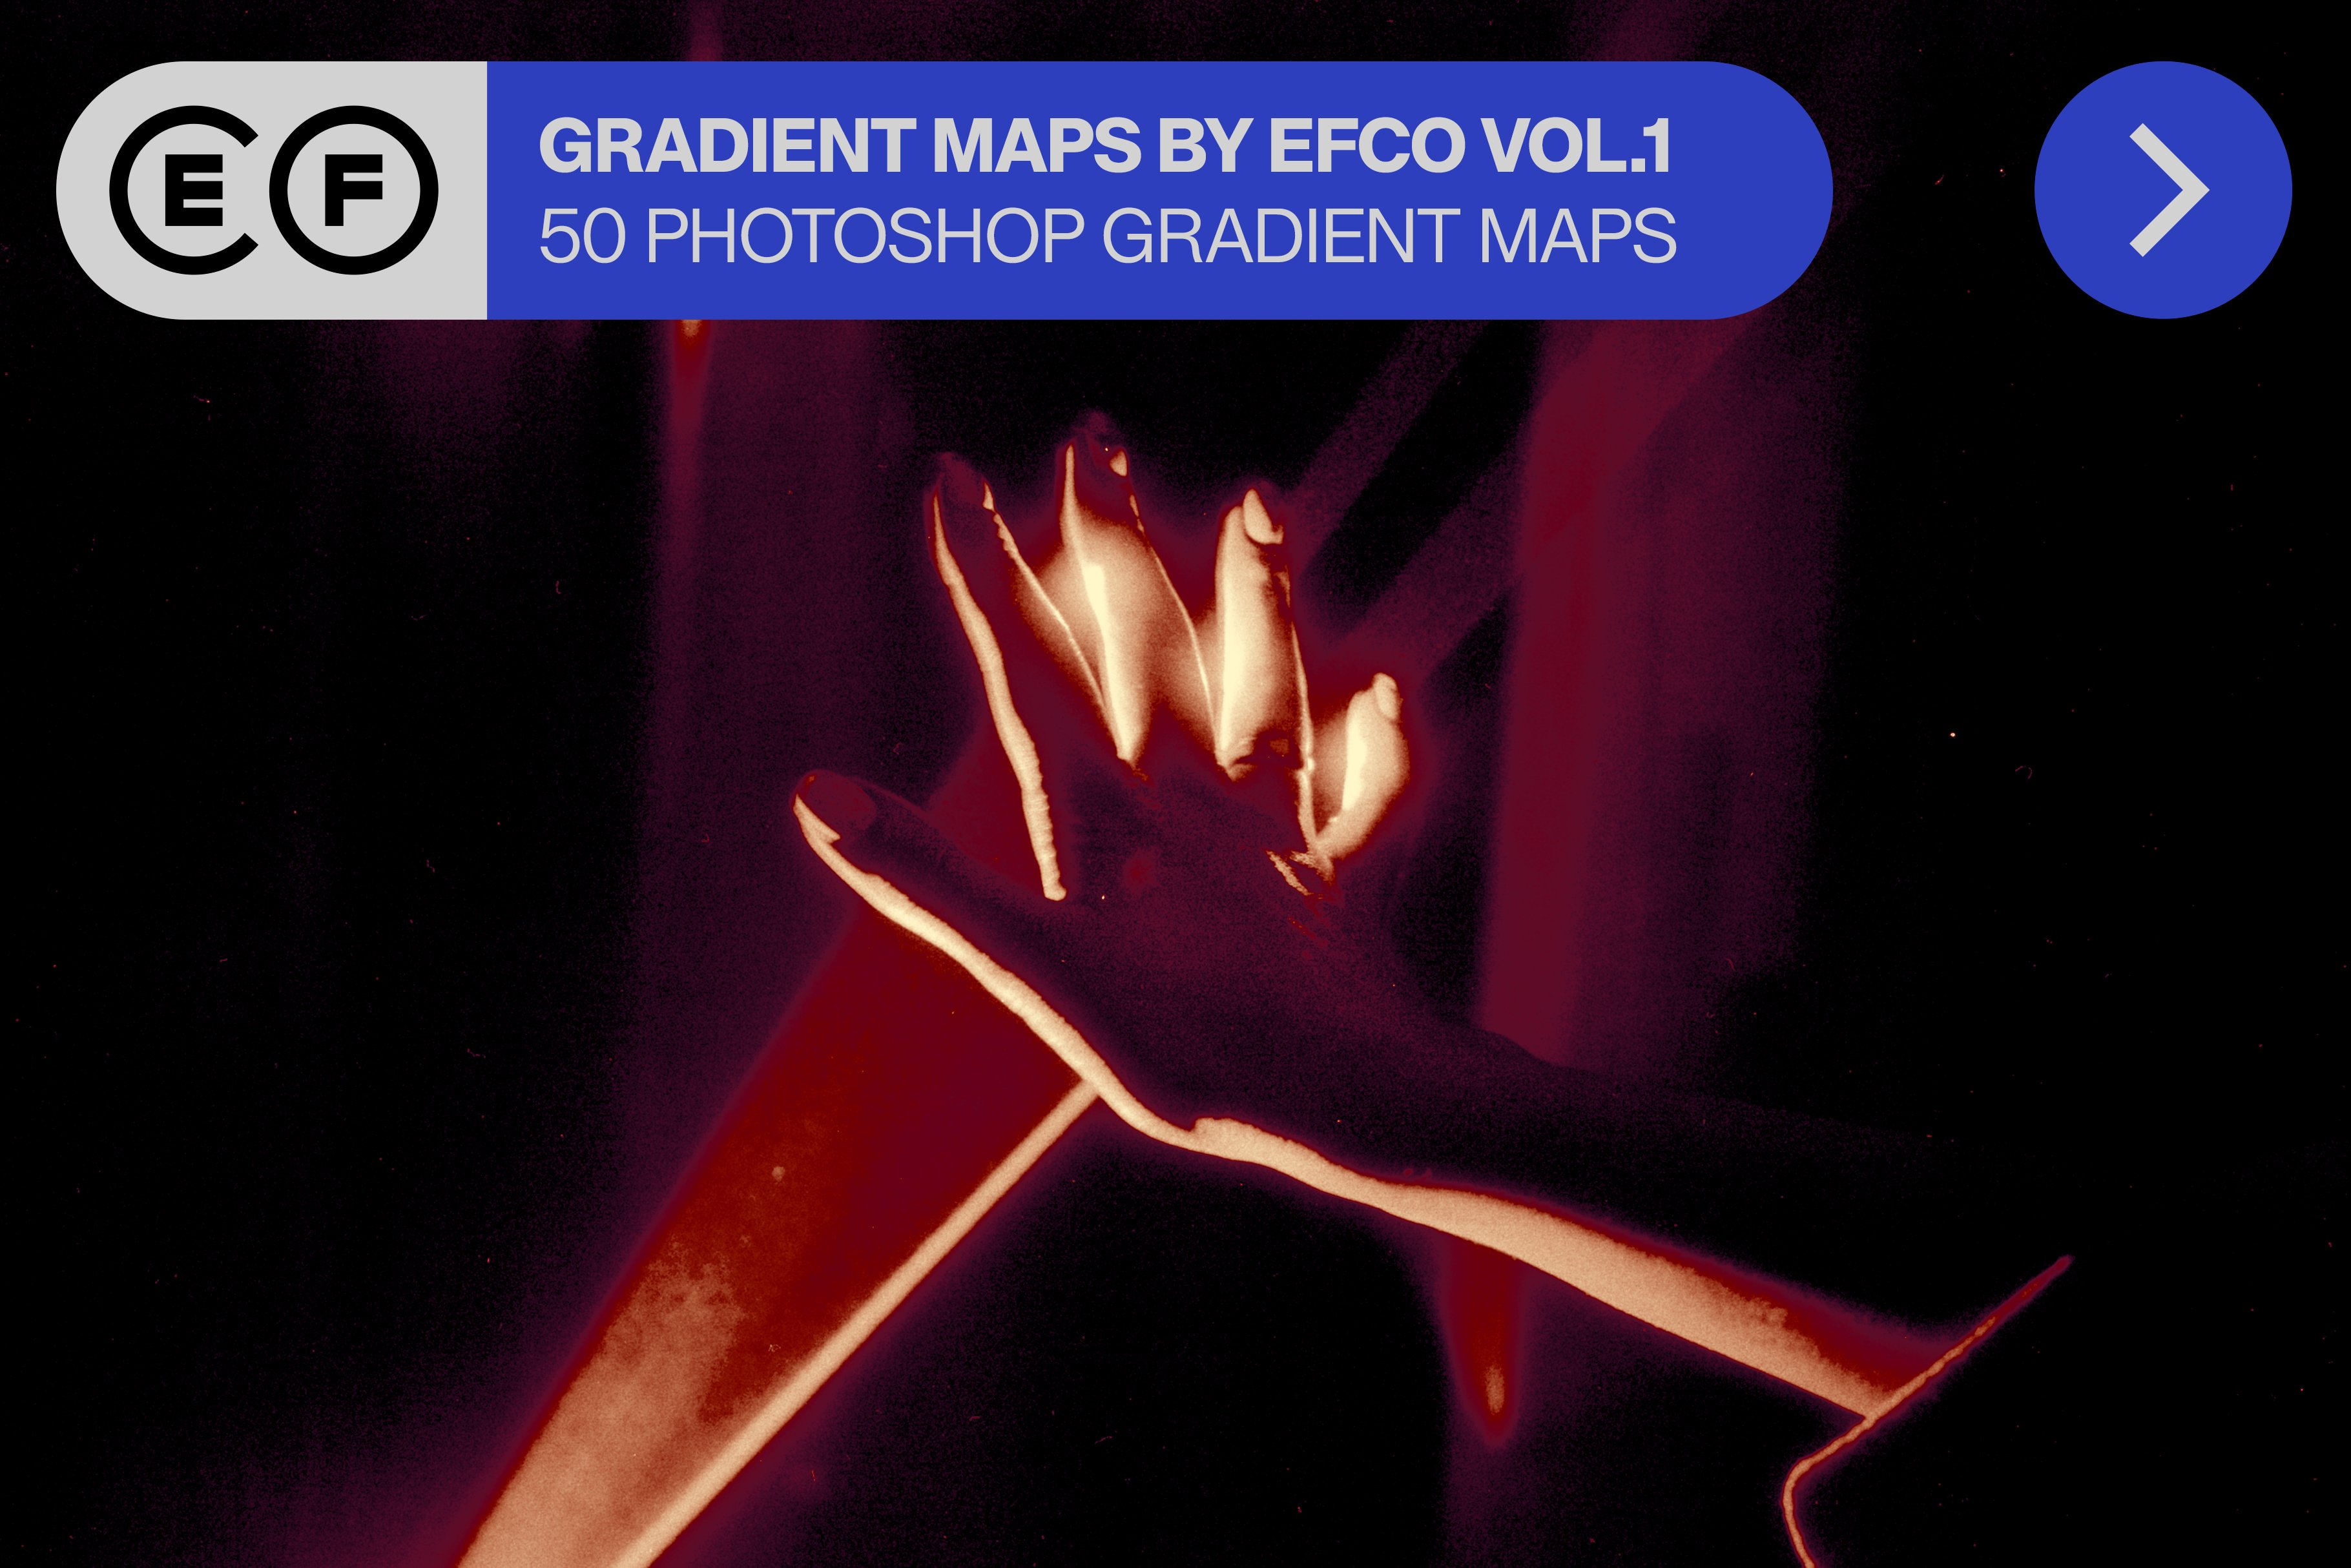 GRADIENT MAPS BY EFCO VOL.1cover image.